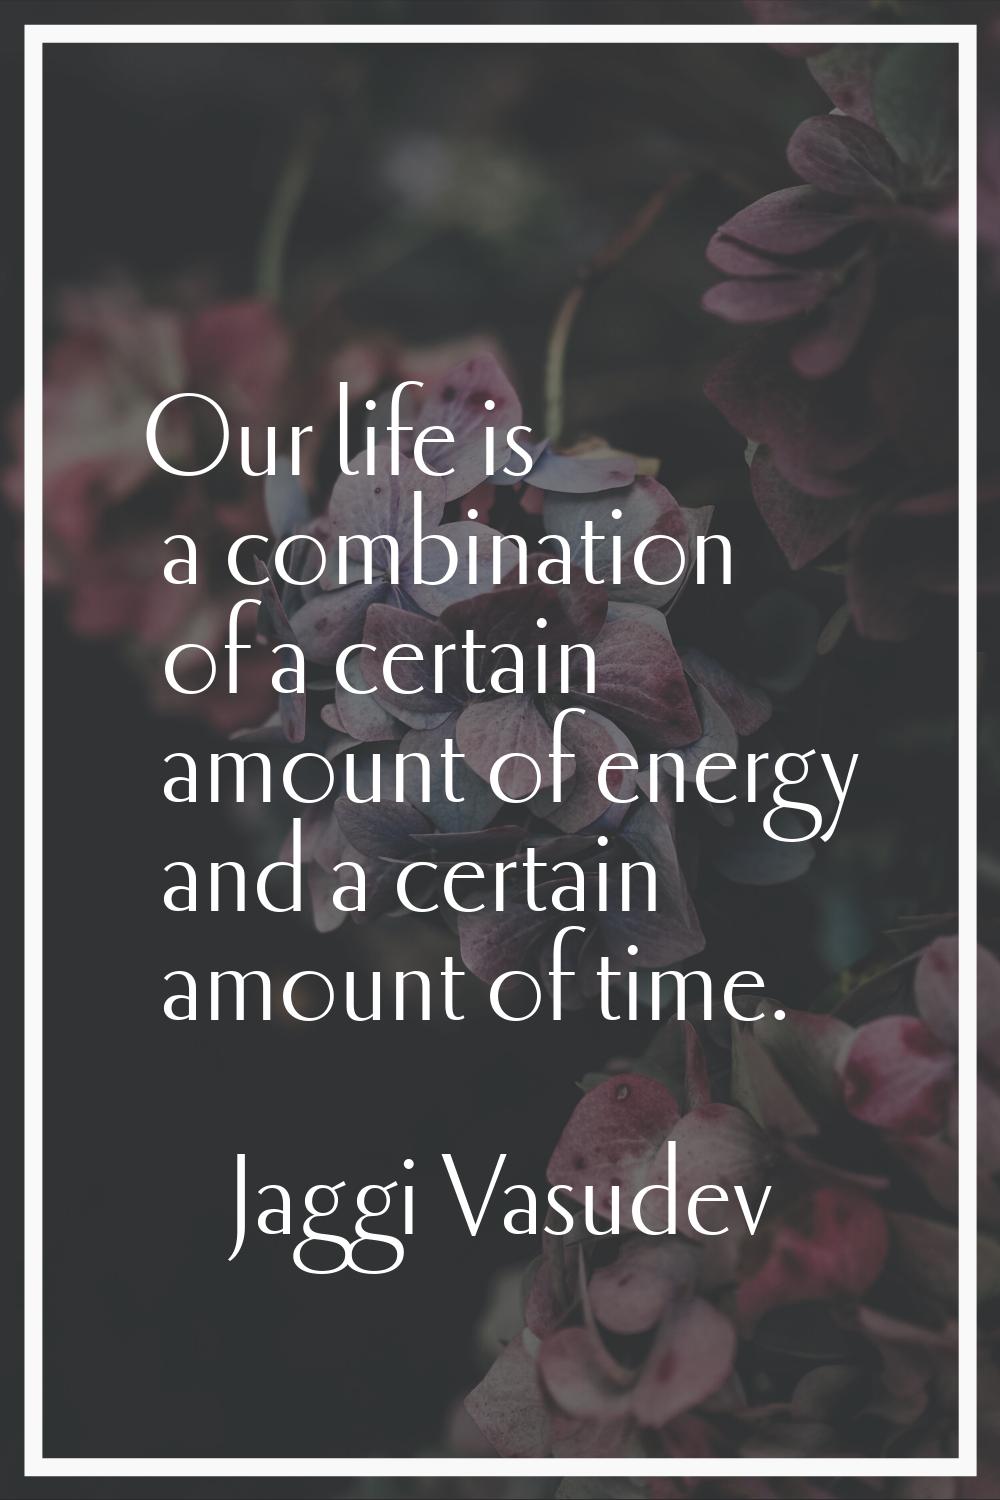 Our life is a combination of a certain amount of energy and a certain amount of time.